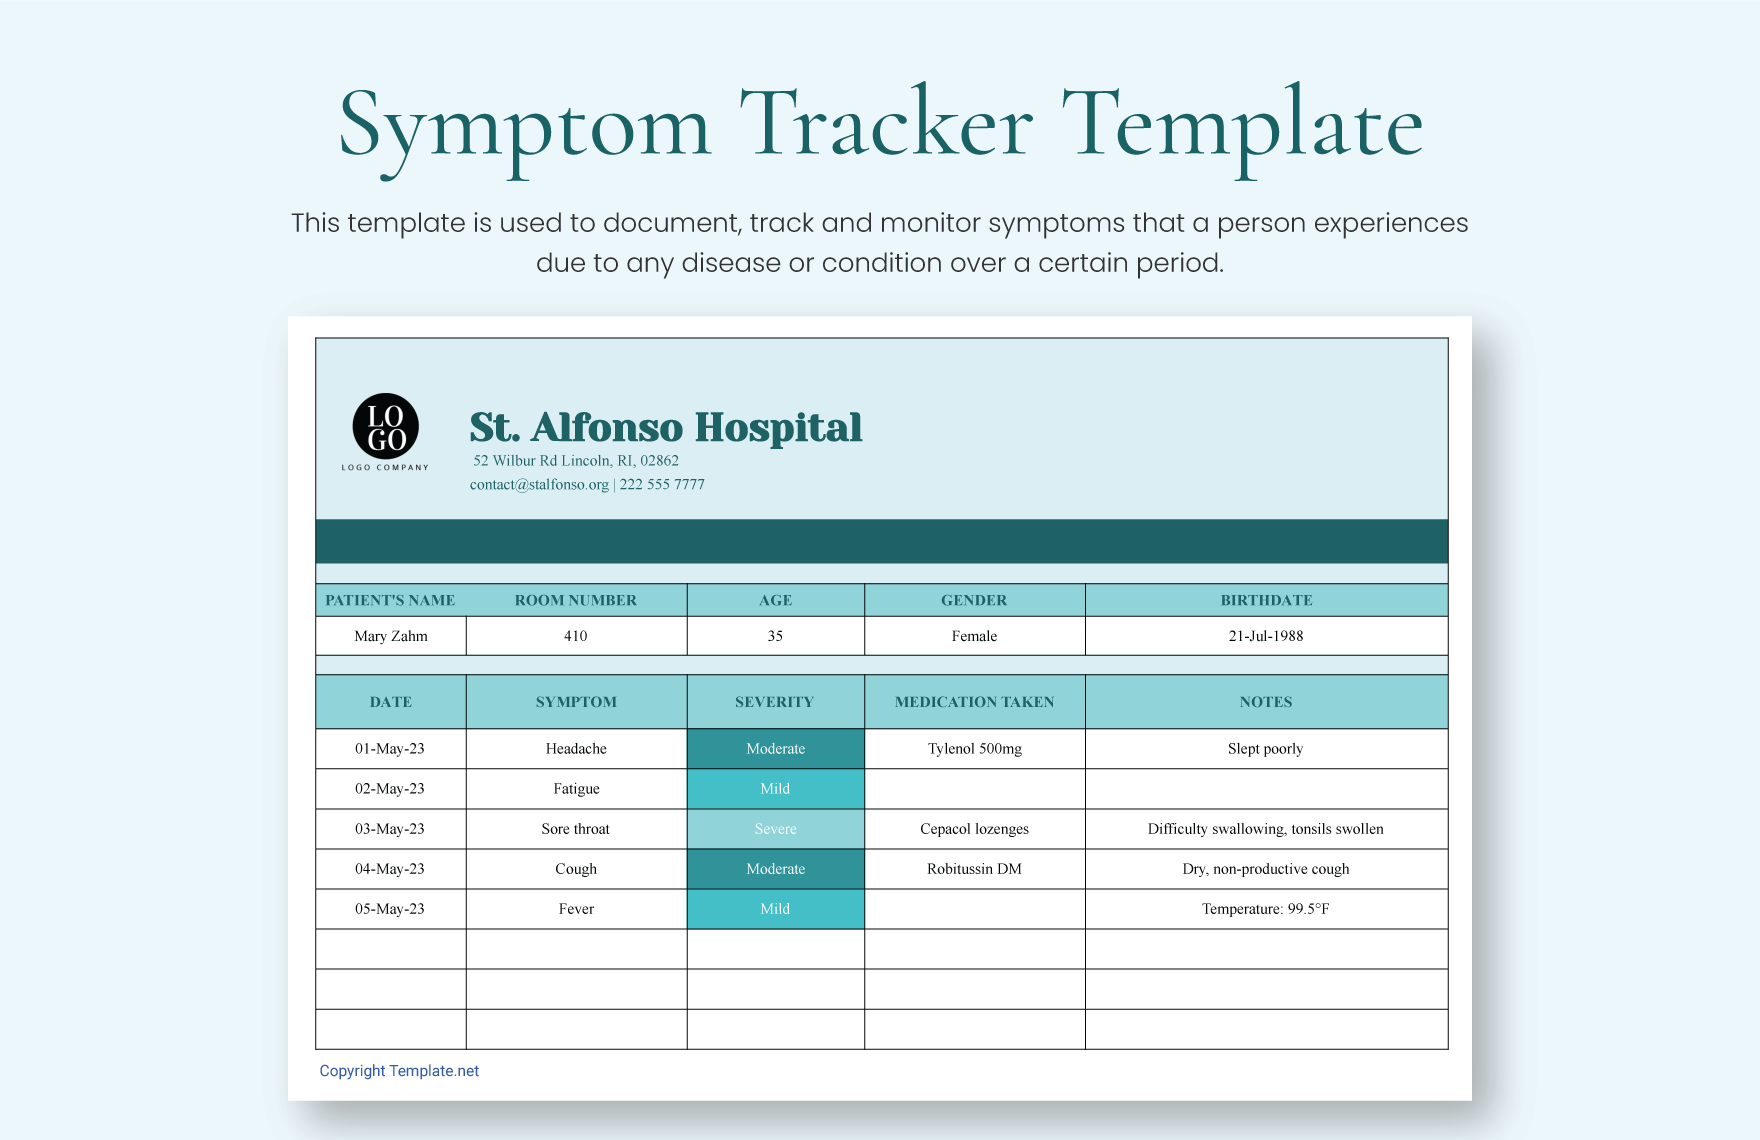 Symptom Tracker Template in Excel, Google Sheets